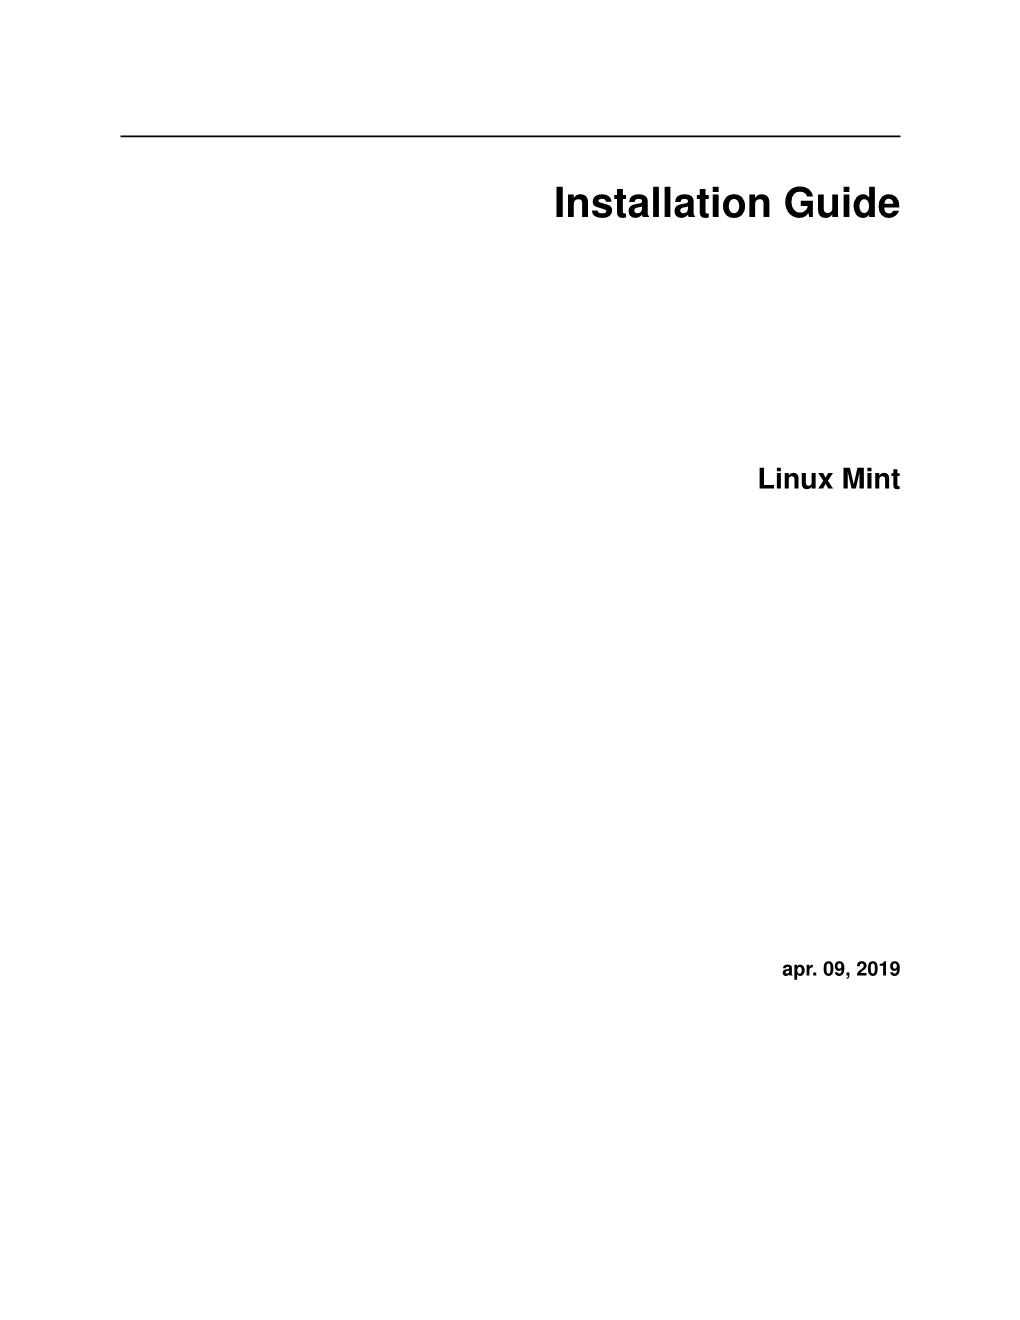 Installation Guide Linux Mint